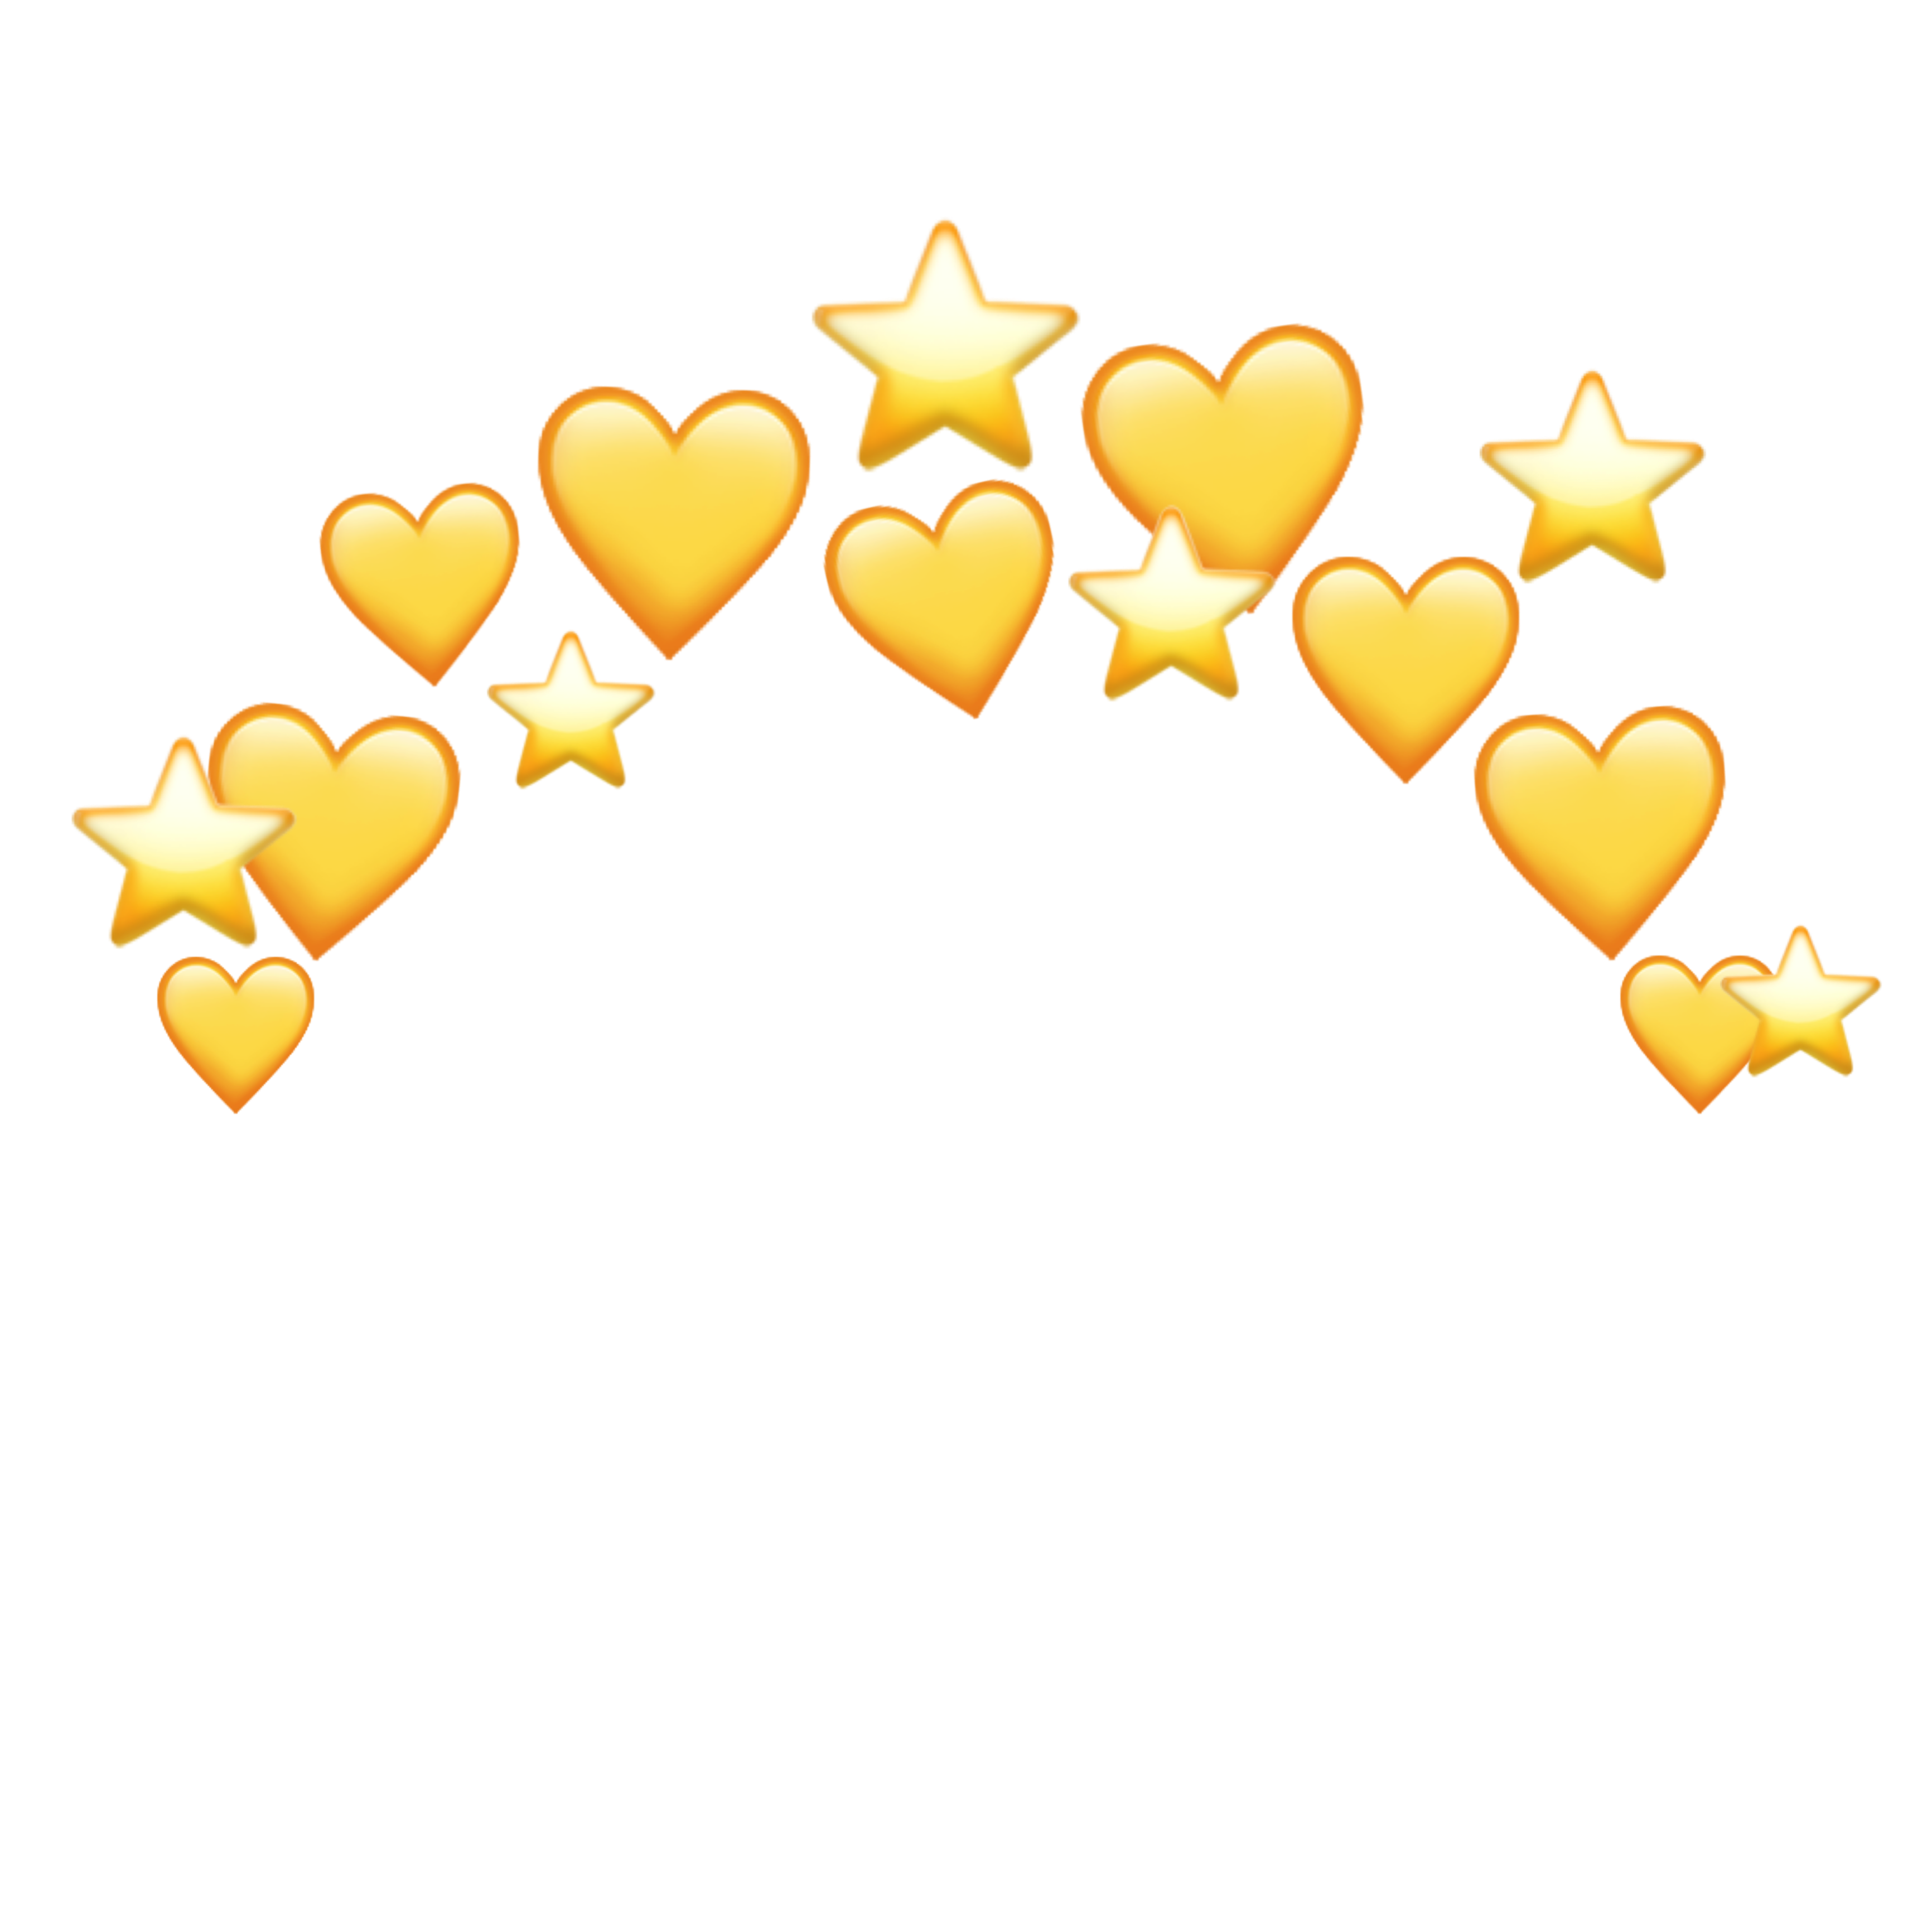 Yellow Heart Emoji Crown All in one Photos.